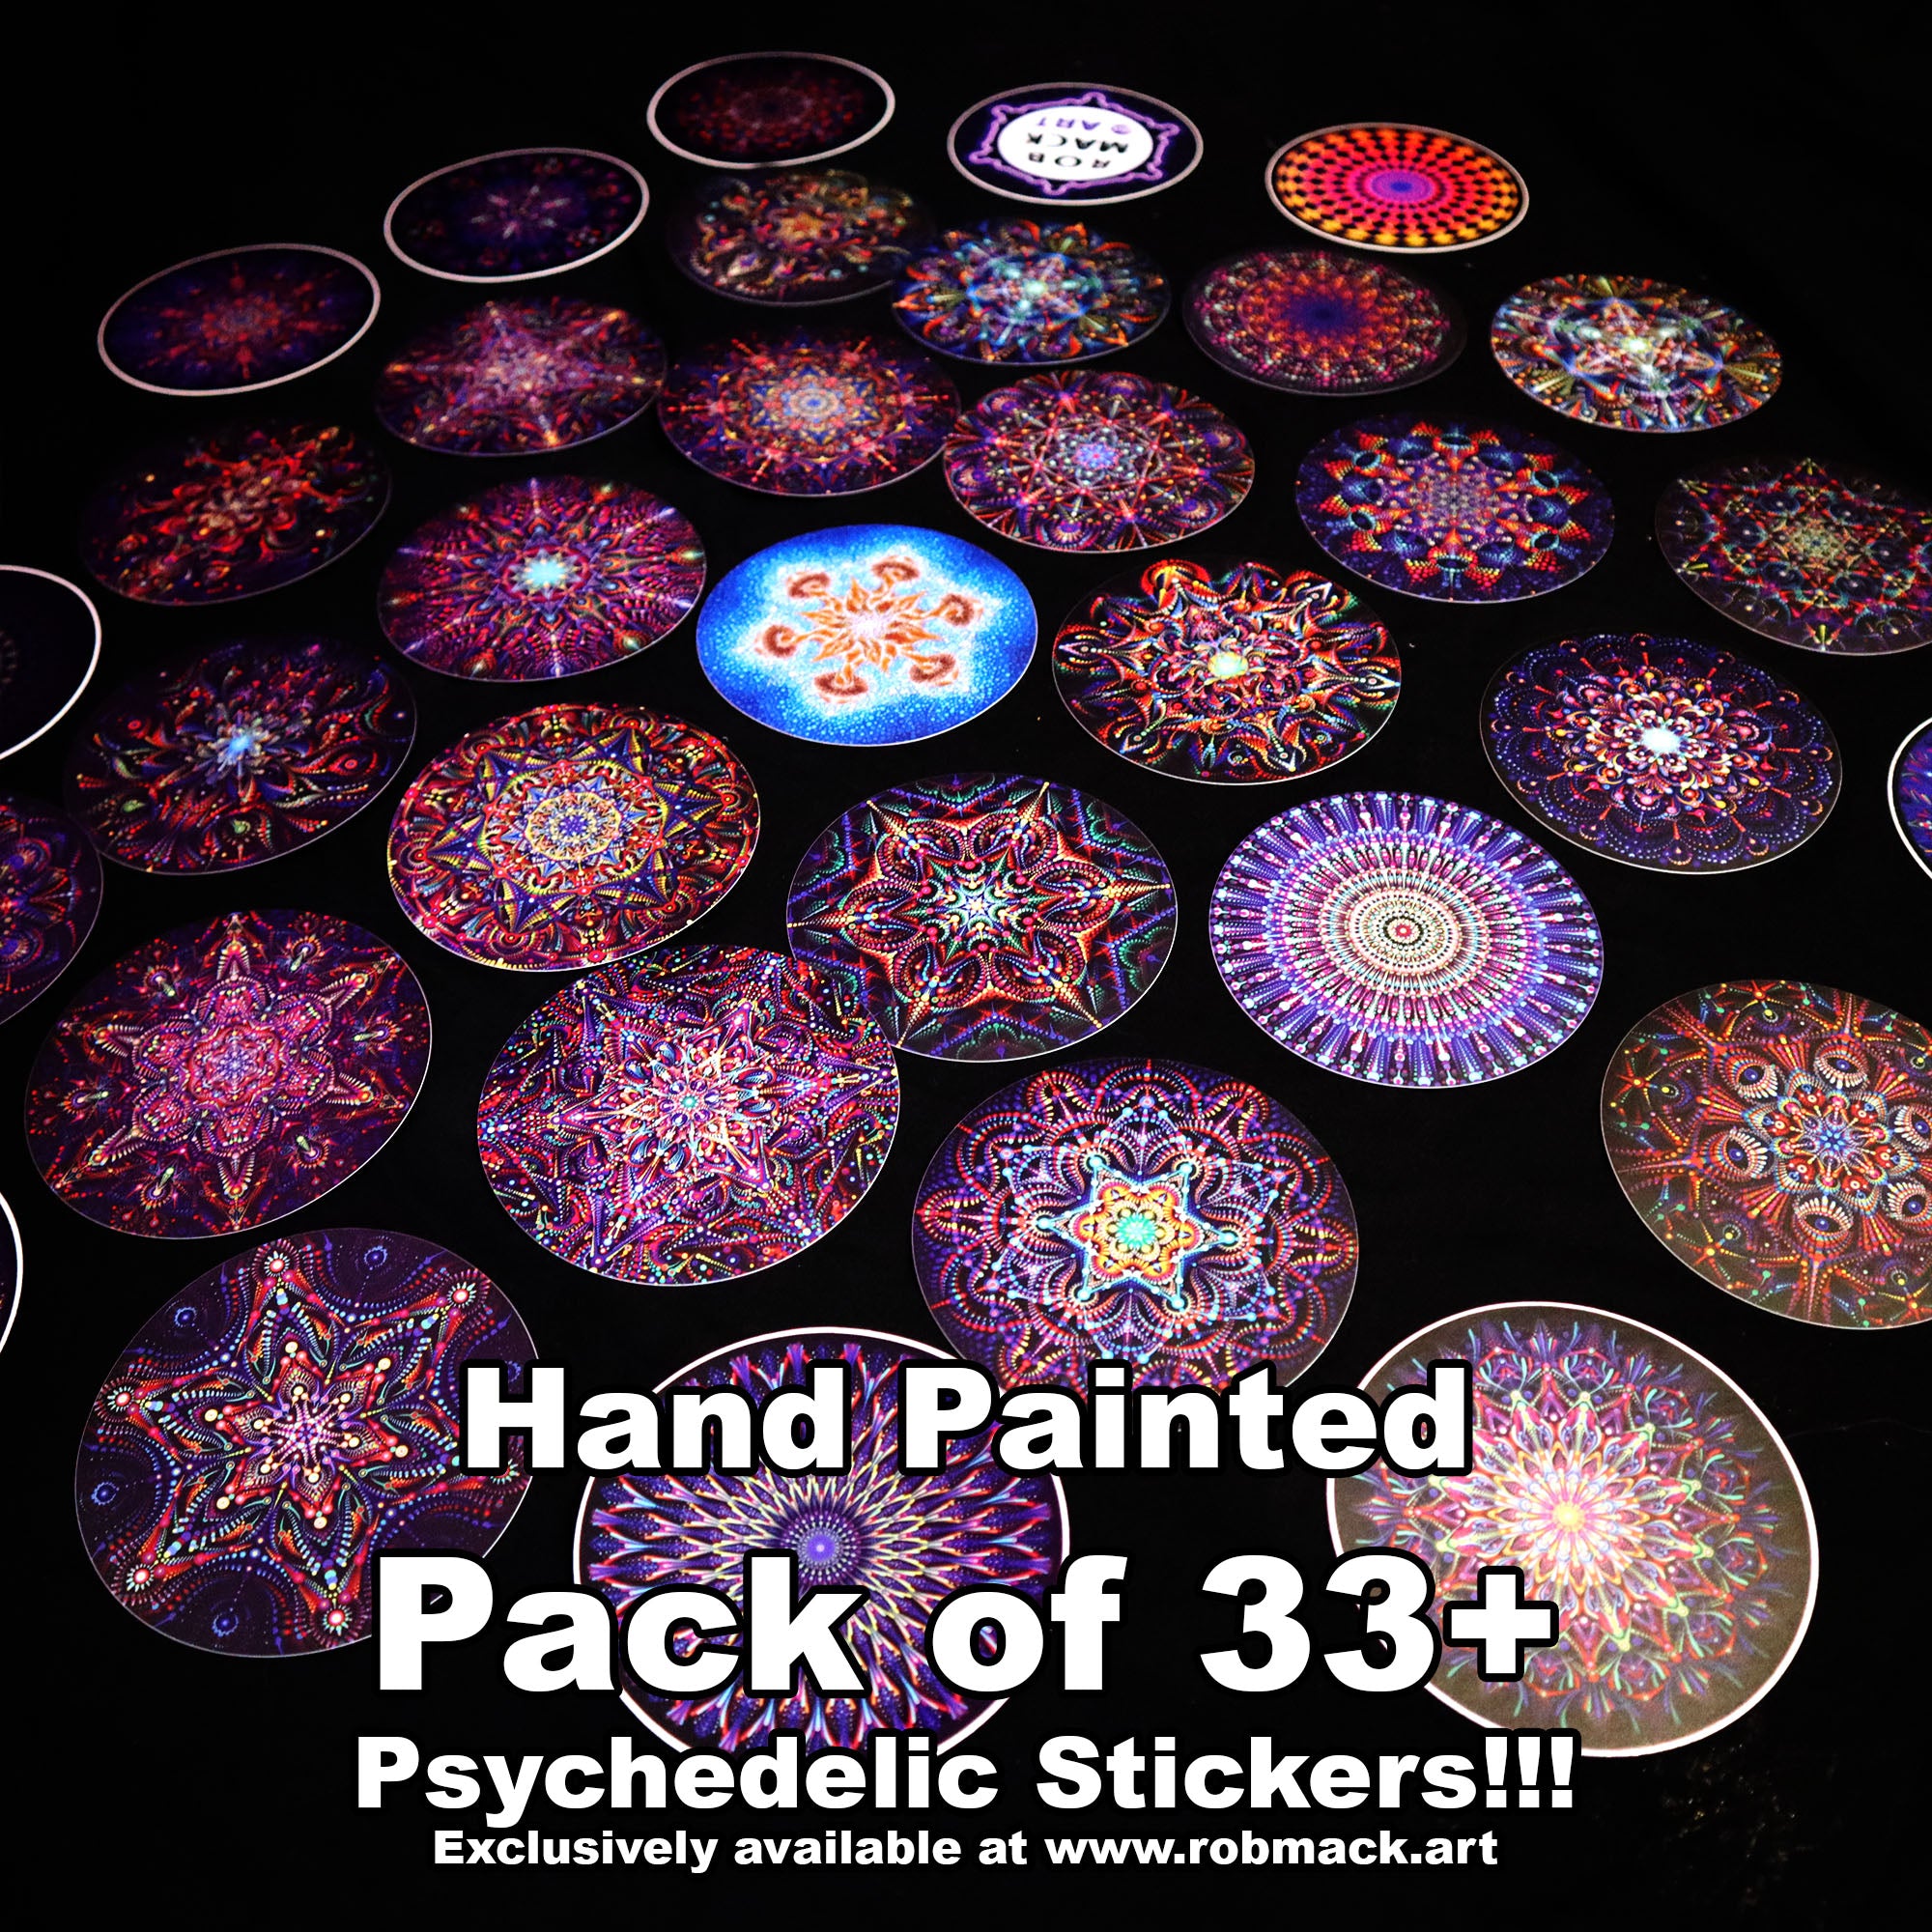 Hand Painted 33+ Psychedelic Sticker pack